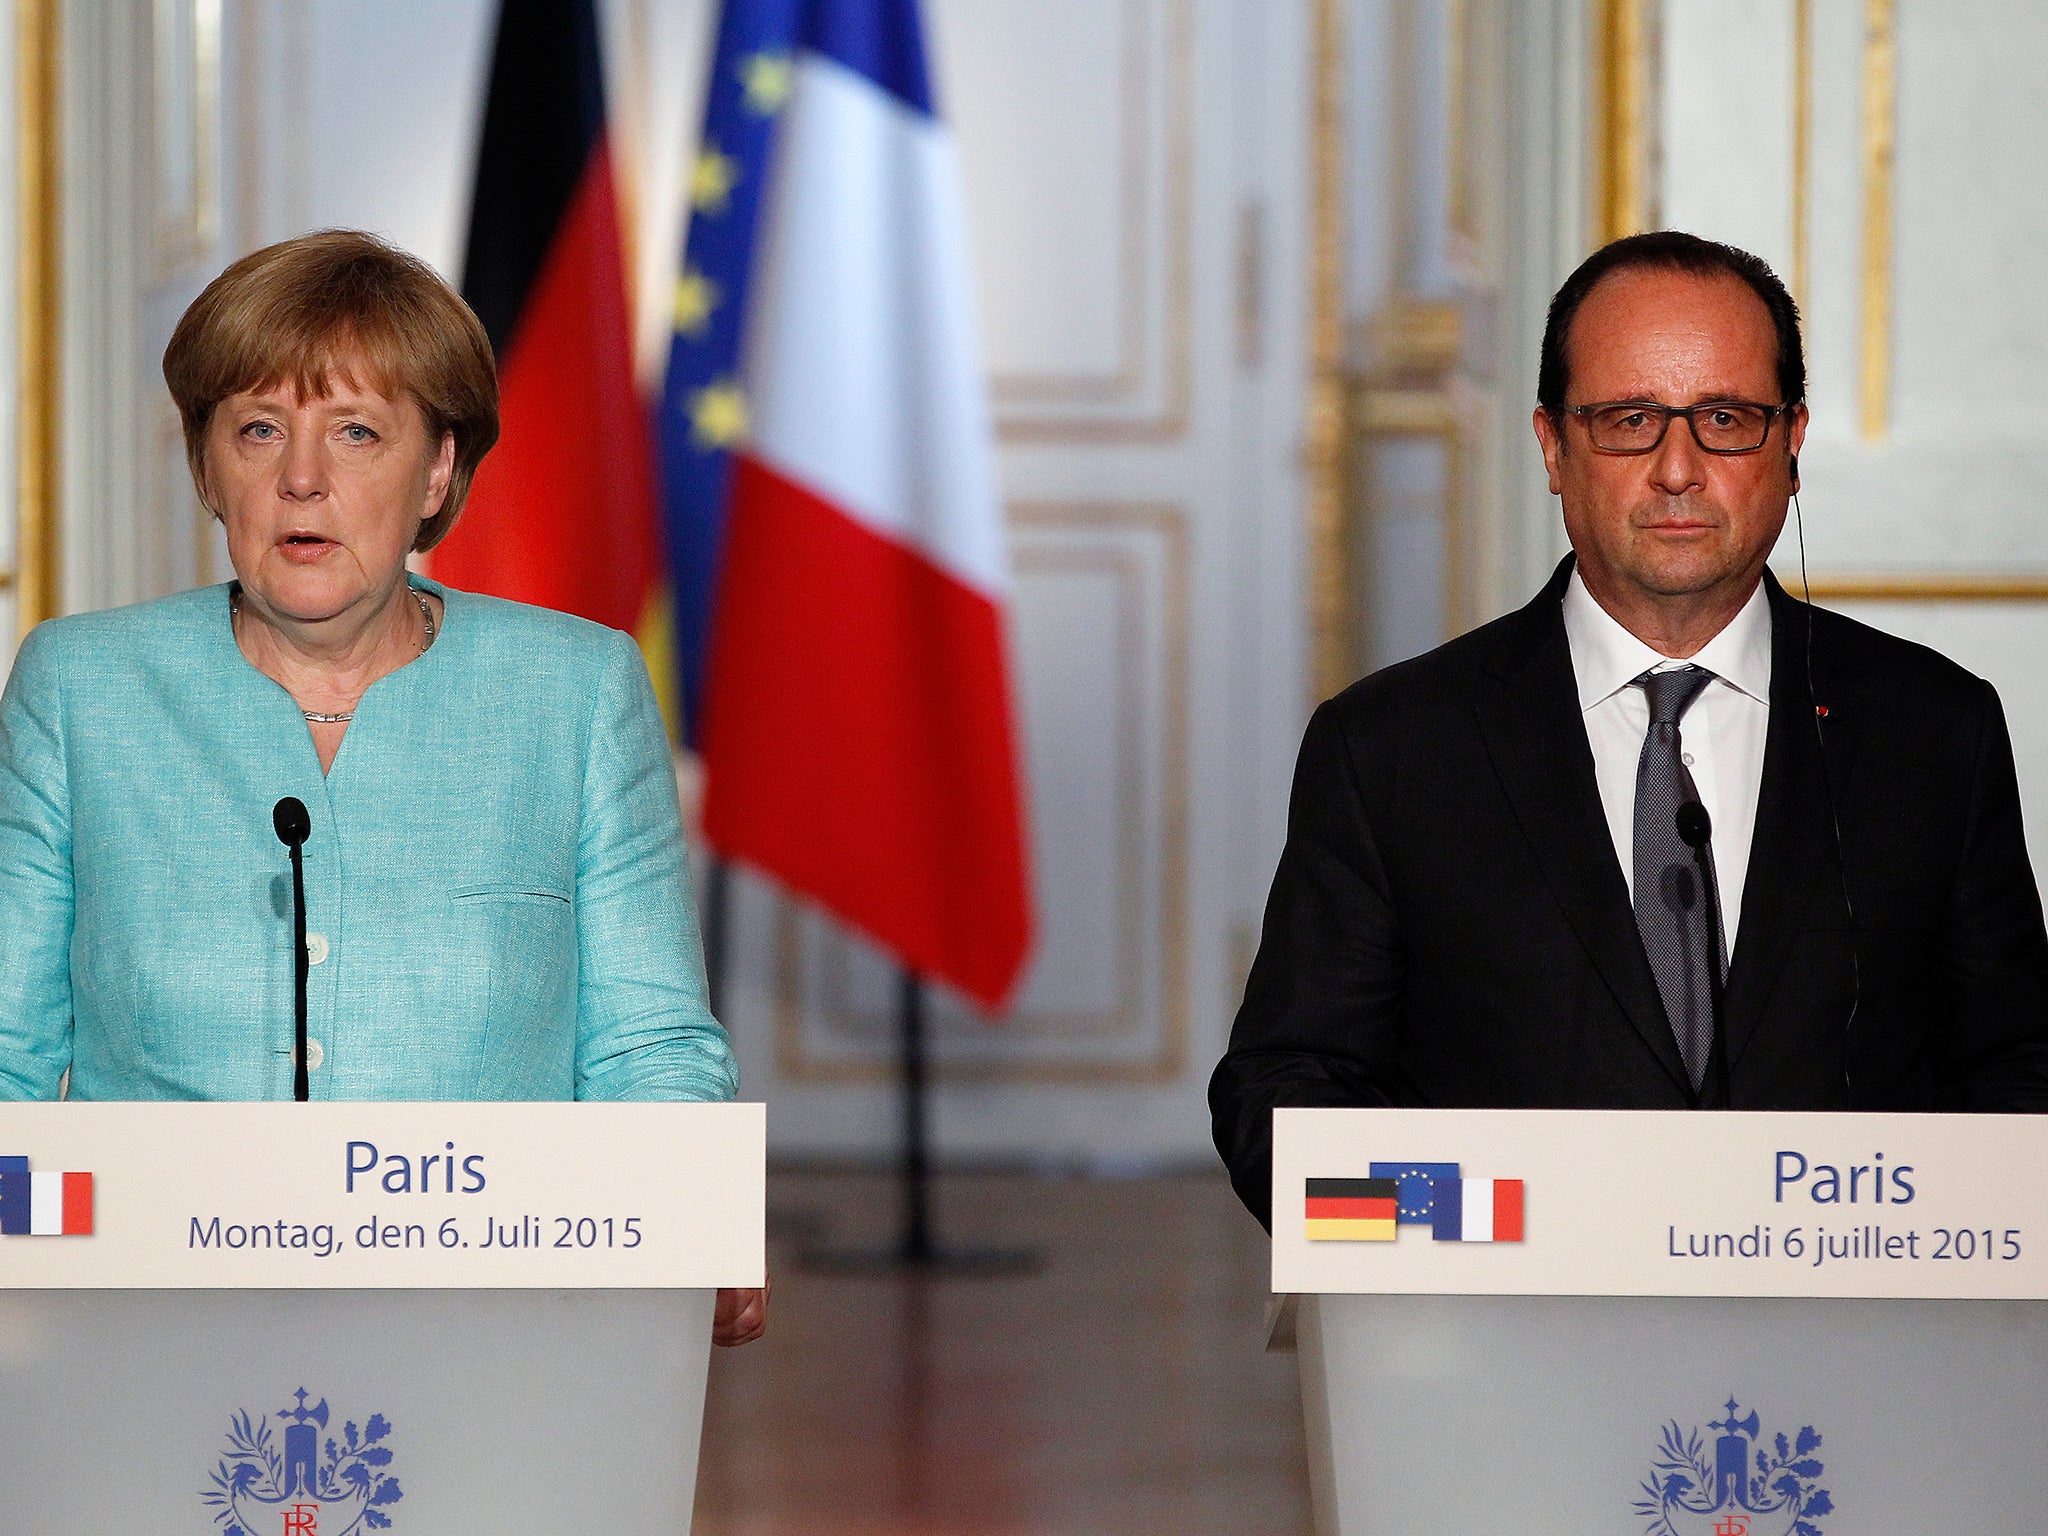 French President Francois Hollande and German Chancellor Angela Merkel during a press conference after their meeting at the Elysee Palace. The two leaders met to discuss the situation concerning the Greece in the European Union